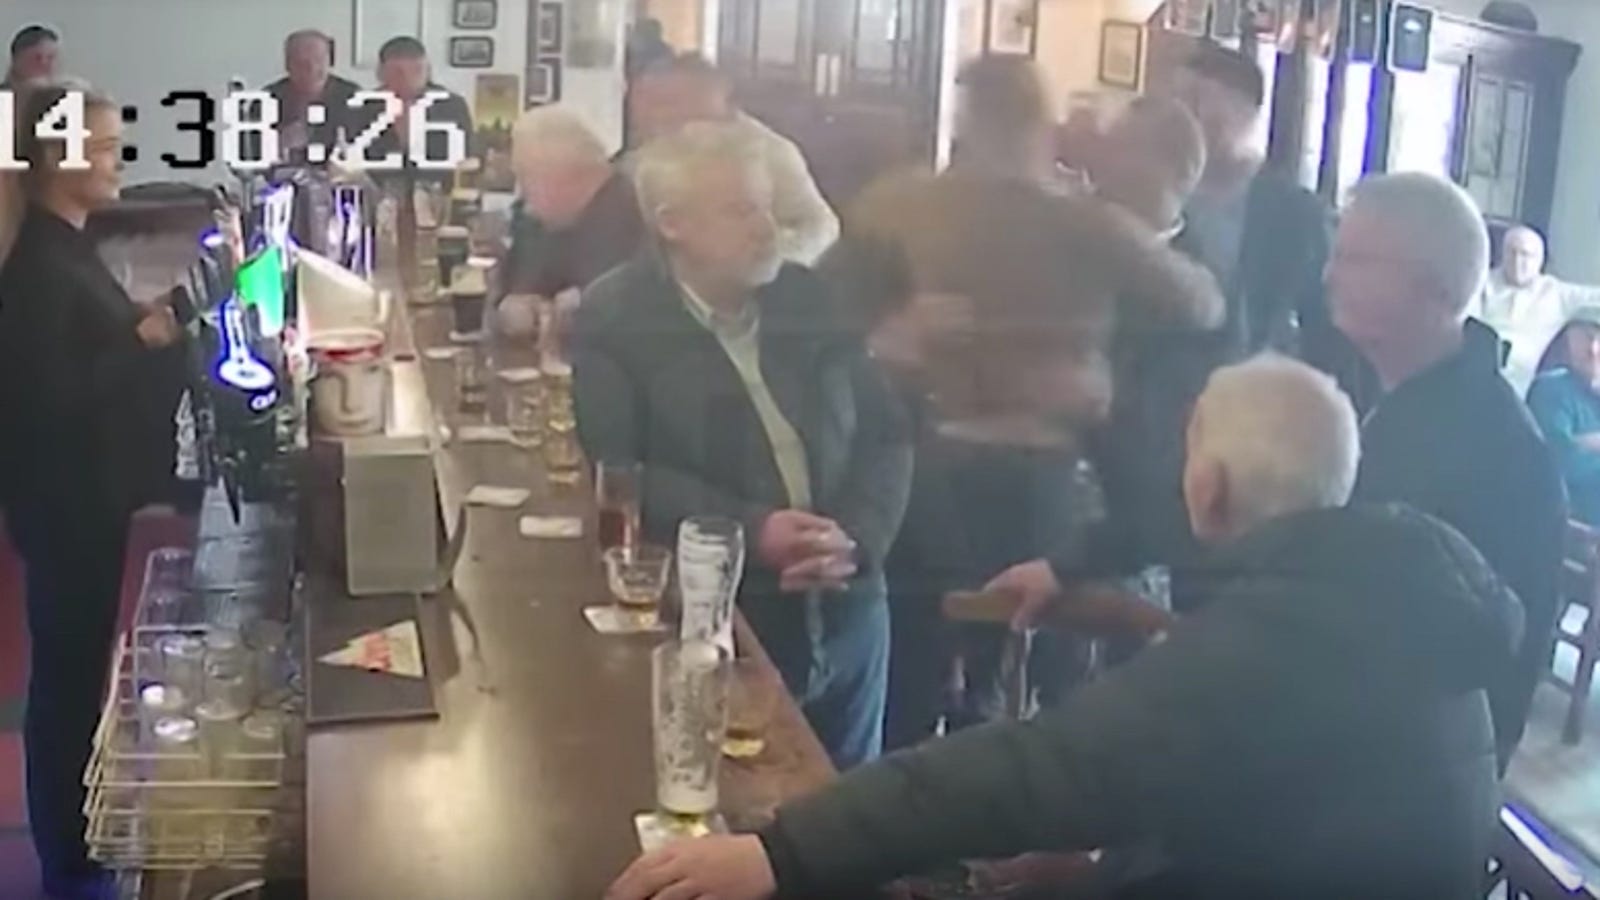 Conor McGregor Sucker-Punches Old Man After Whiskey Argument In Dublin Pub1600 x 900